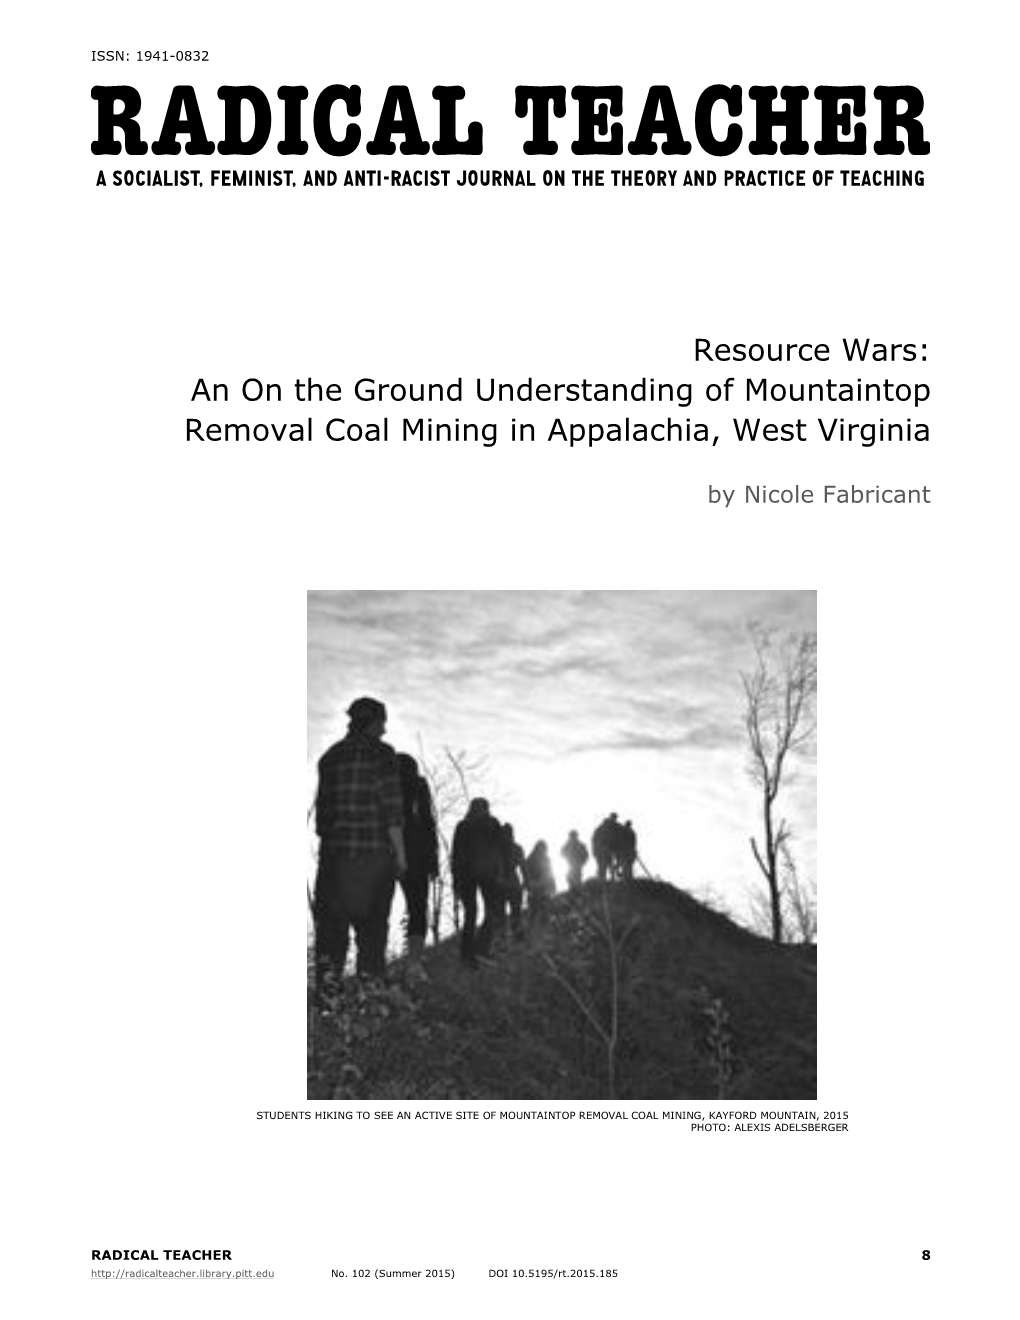 An on the Ground Understanding of Mountaintop Removal Coal Mining in Appalachia, West Virginia